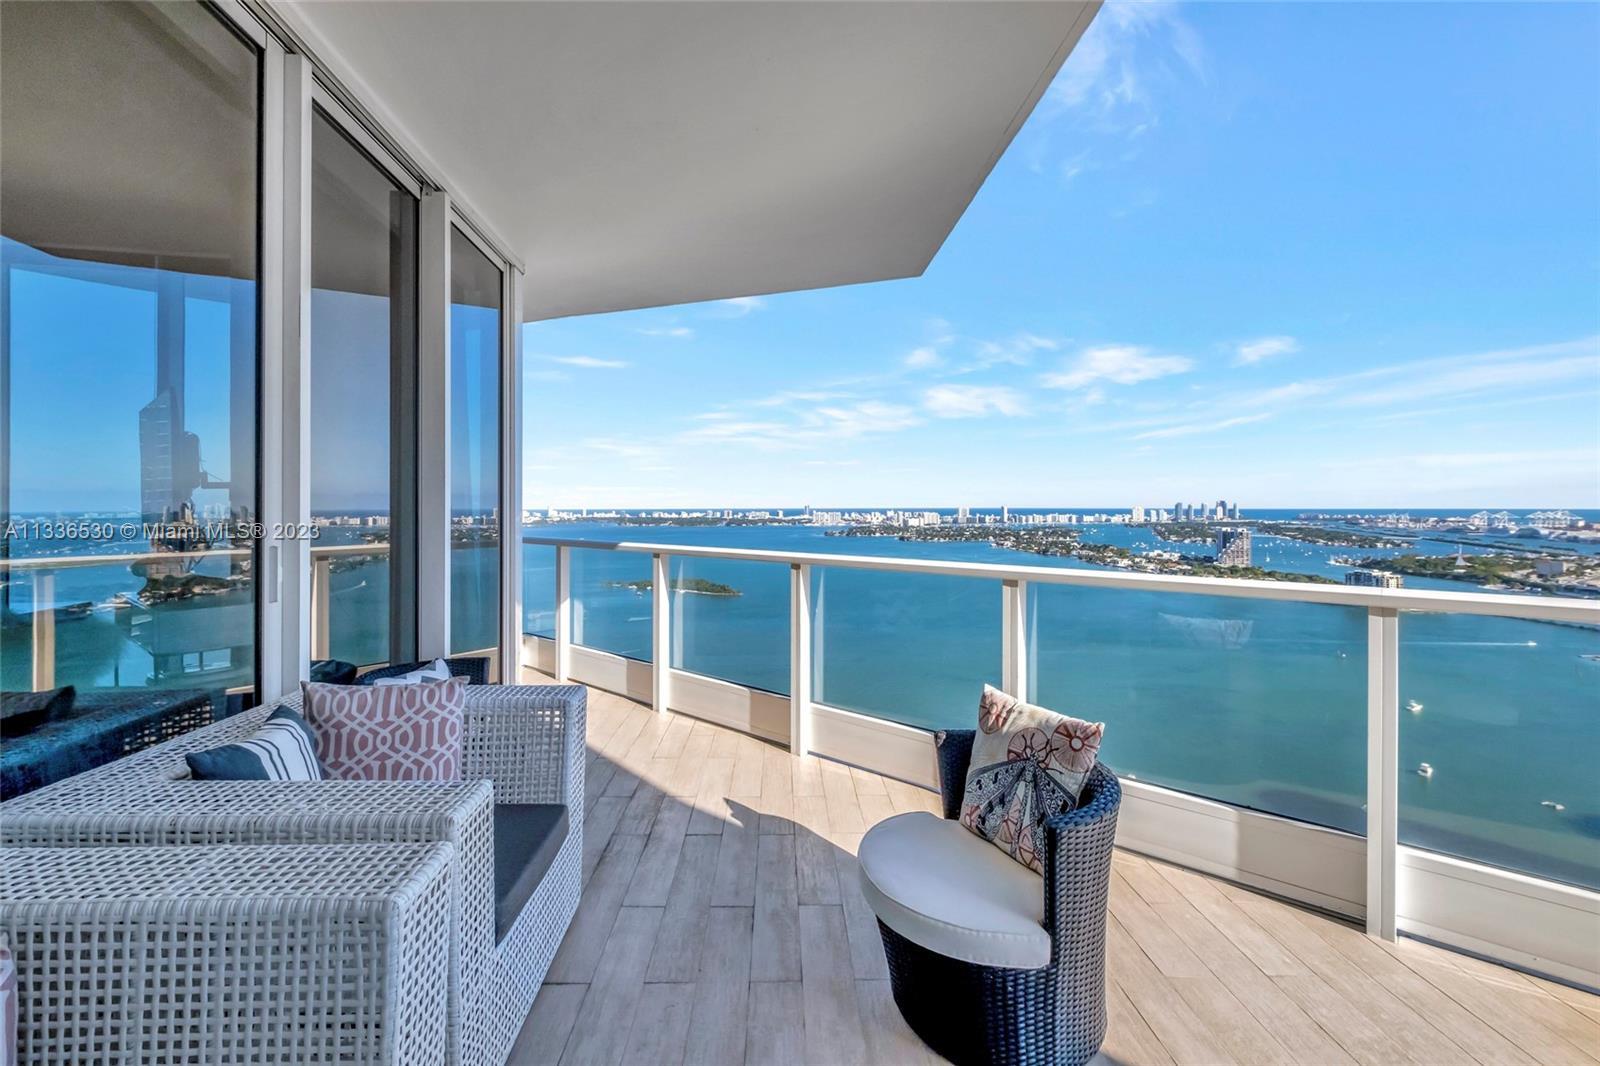 One-of-a-kind home on the most sought after line in Paramount Bay. This 3 bedroom, 3 1/2 baths + Den